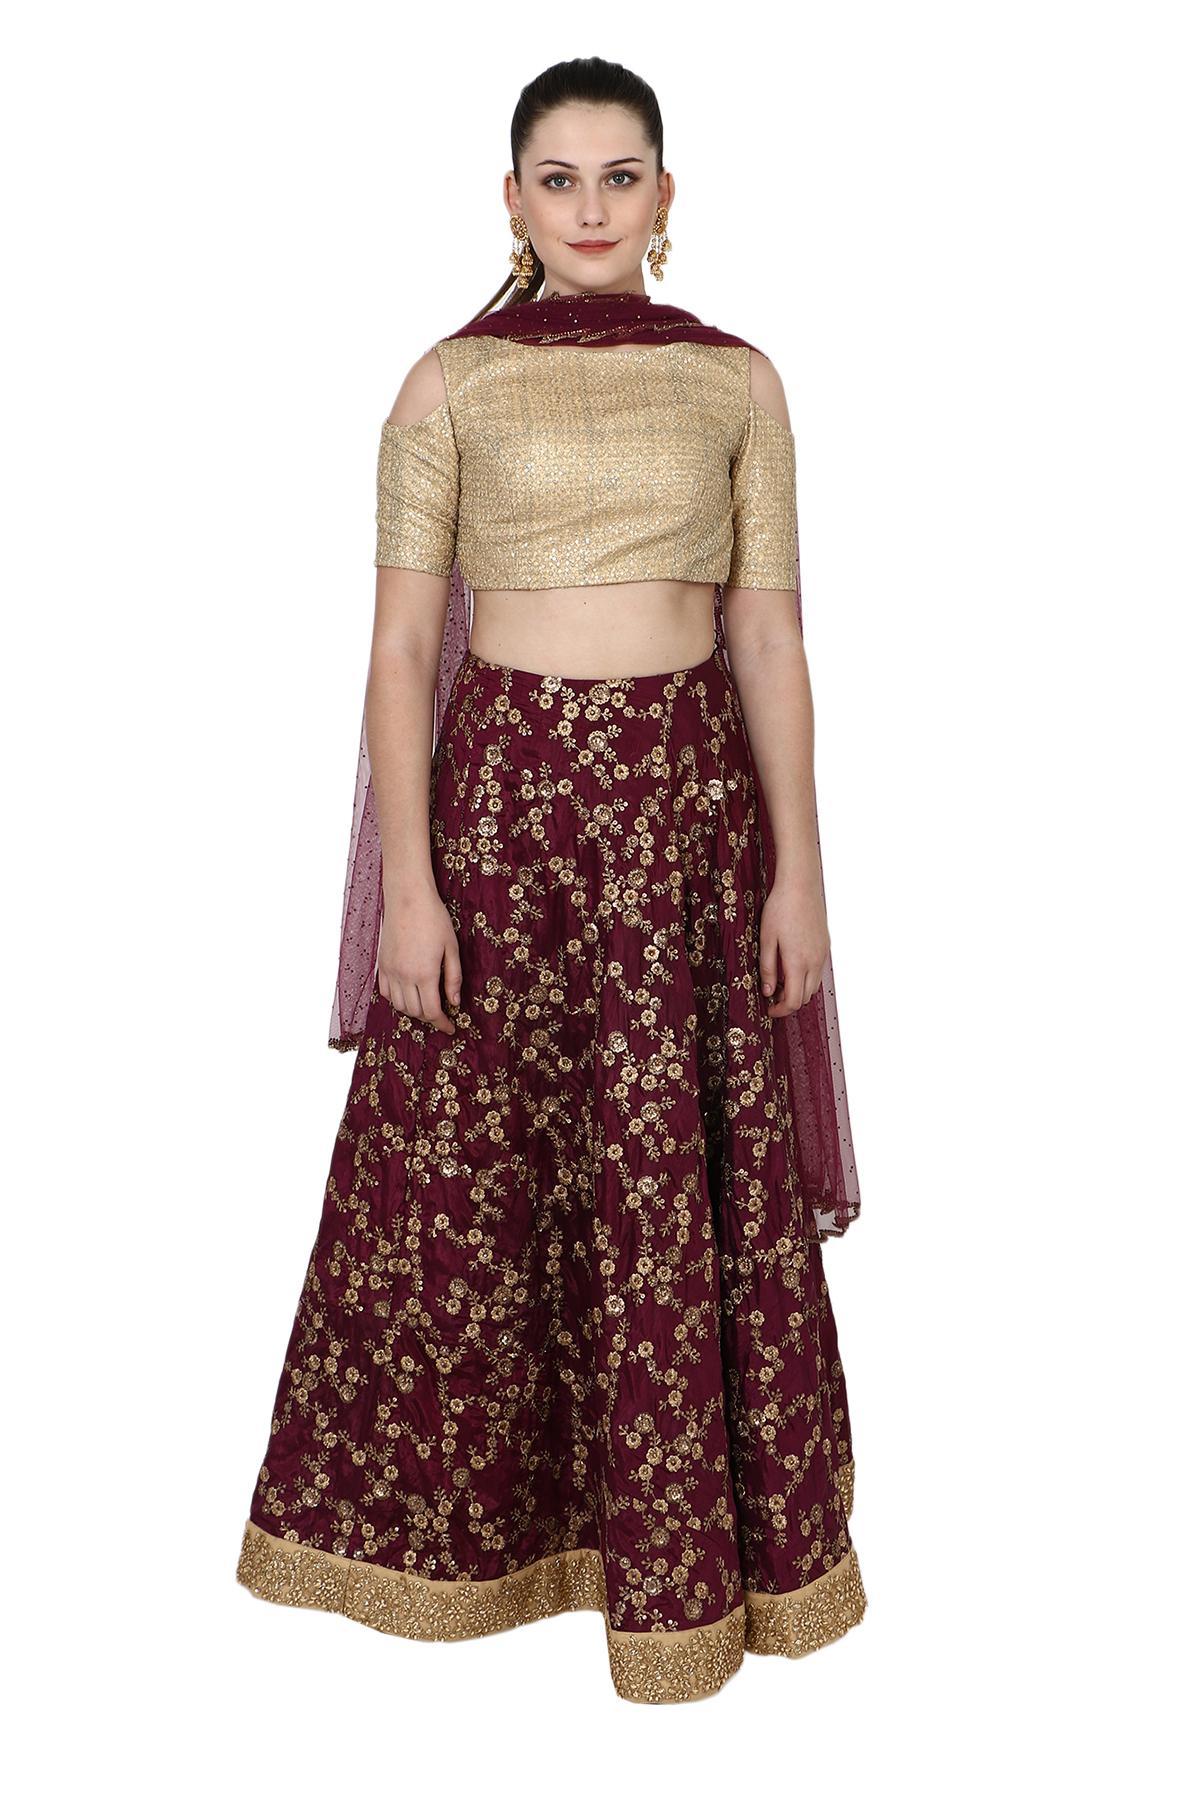 Sangeet Lehengas - Deep Wine Golden Embroidered Lehenga and Bluse with a  Beige Net Dupatta | … | Indian fashion, Indian wedding dress modern,  Dupatta draping styles